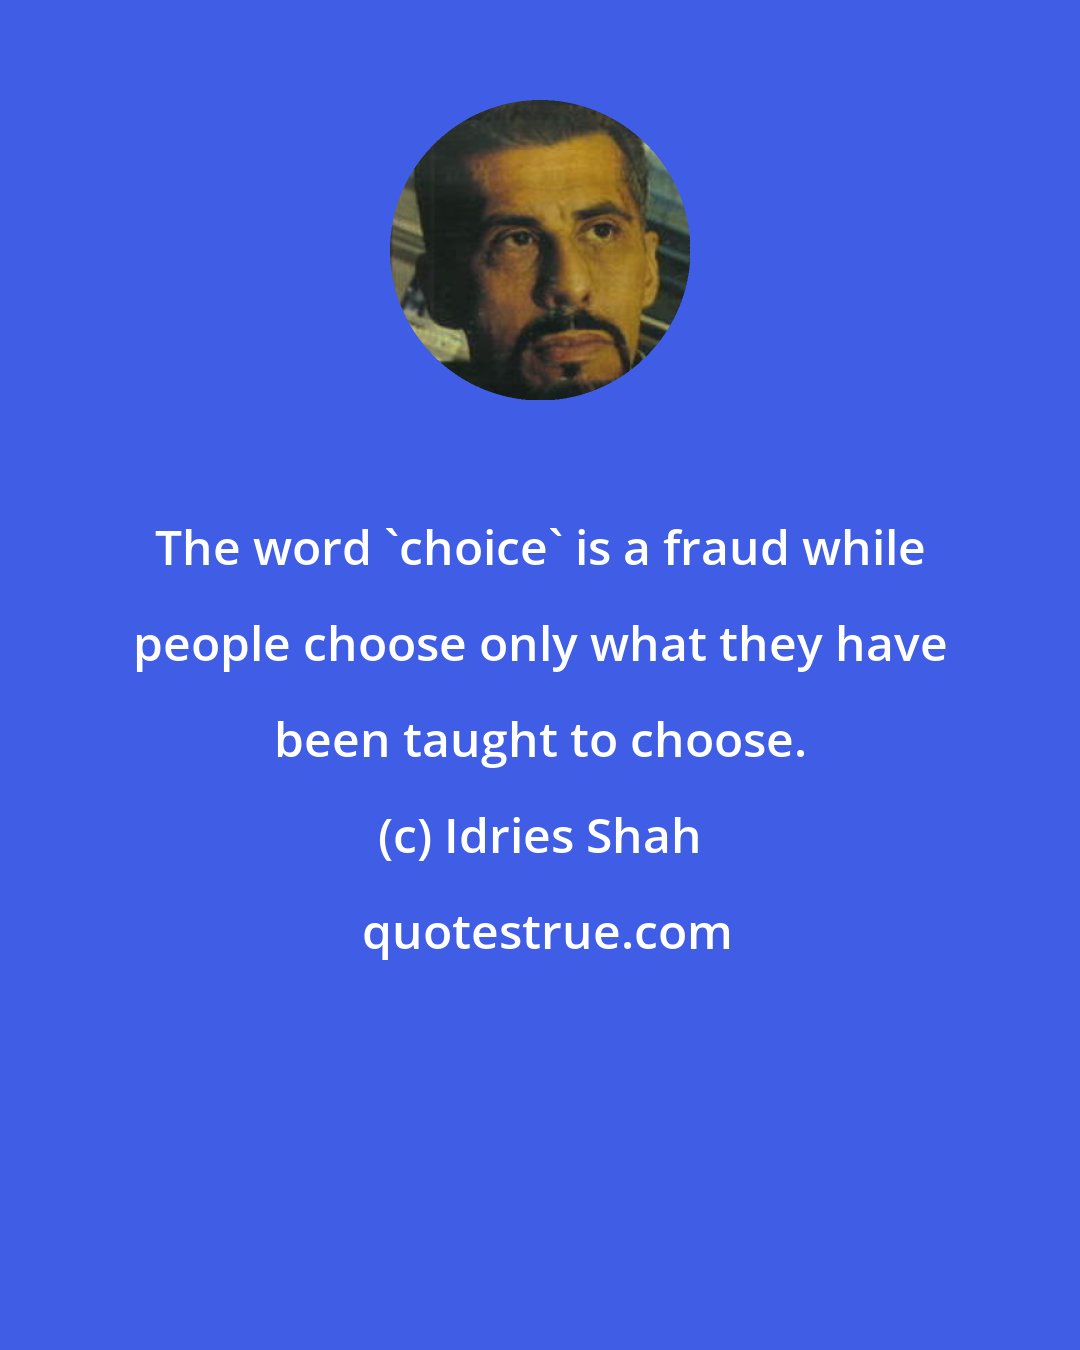 Idries Shah: The word 'choice' is a fraud while people choose only what they have been taught to choose.